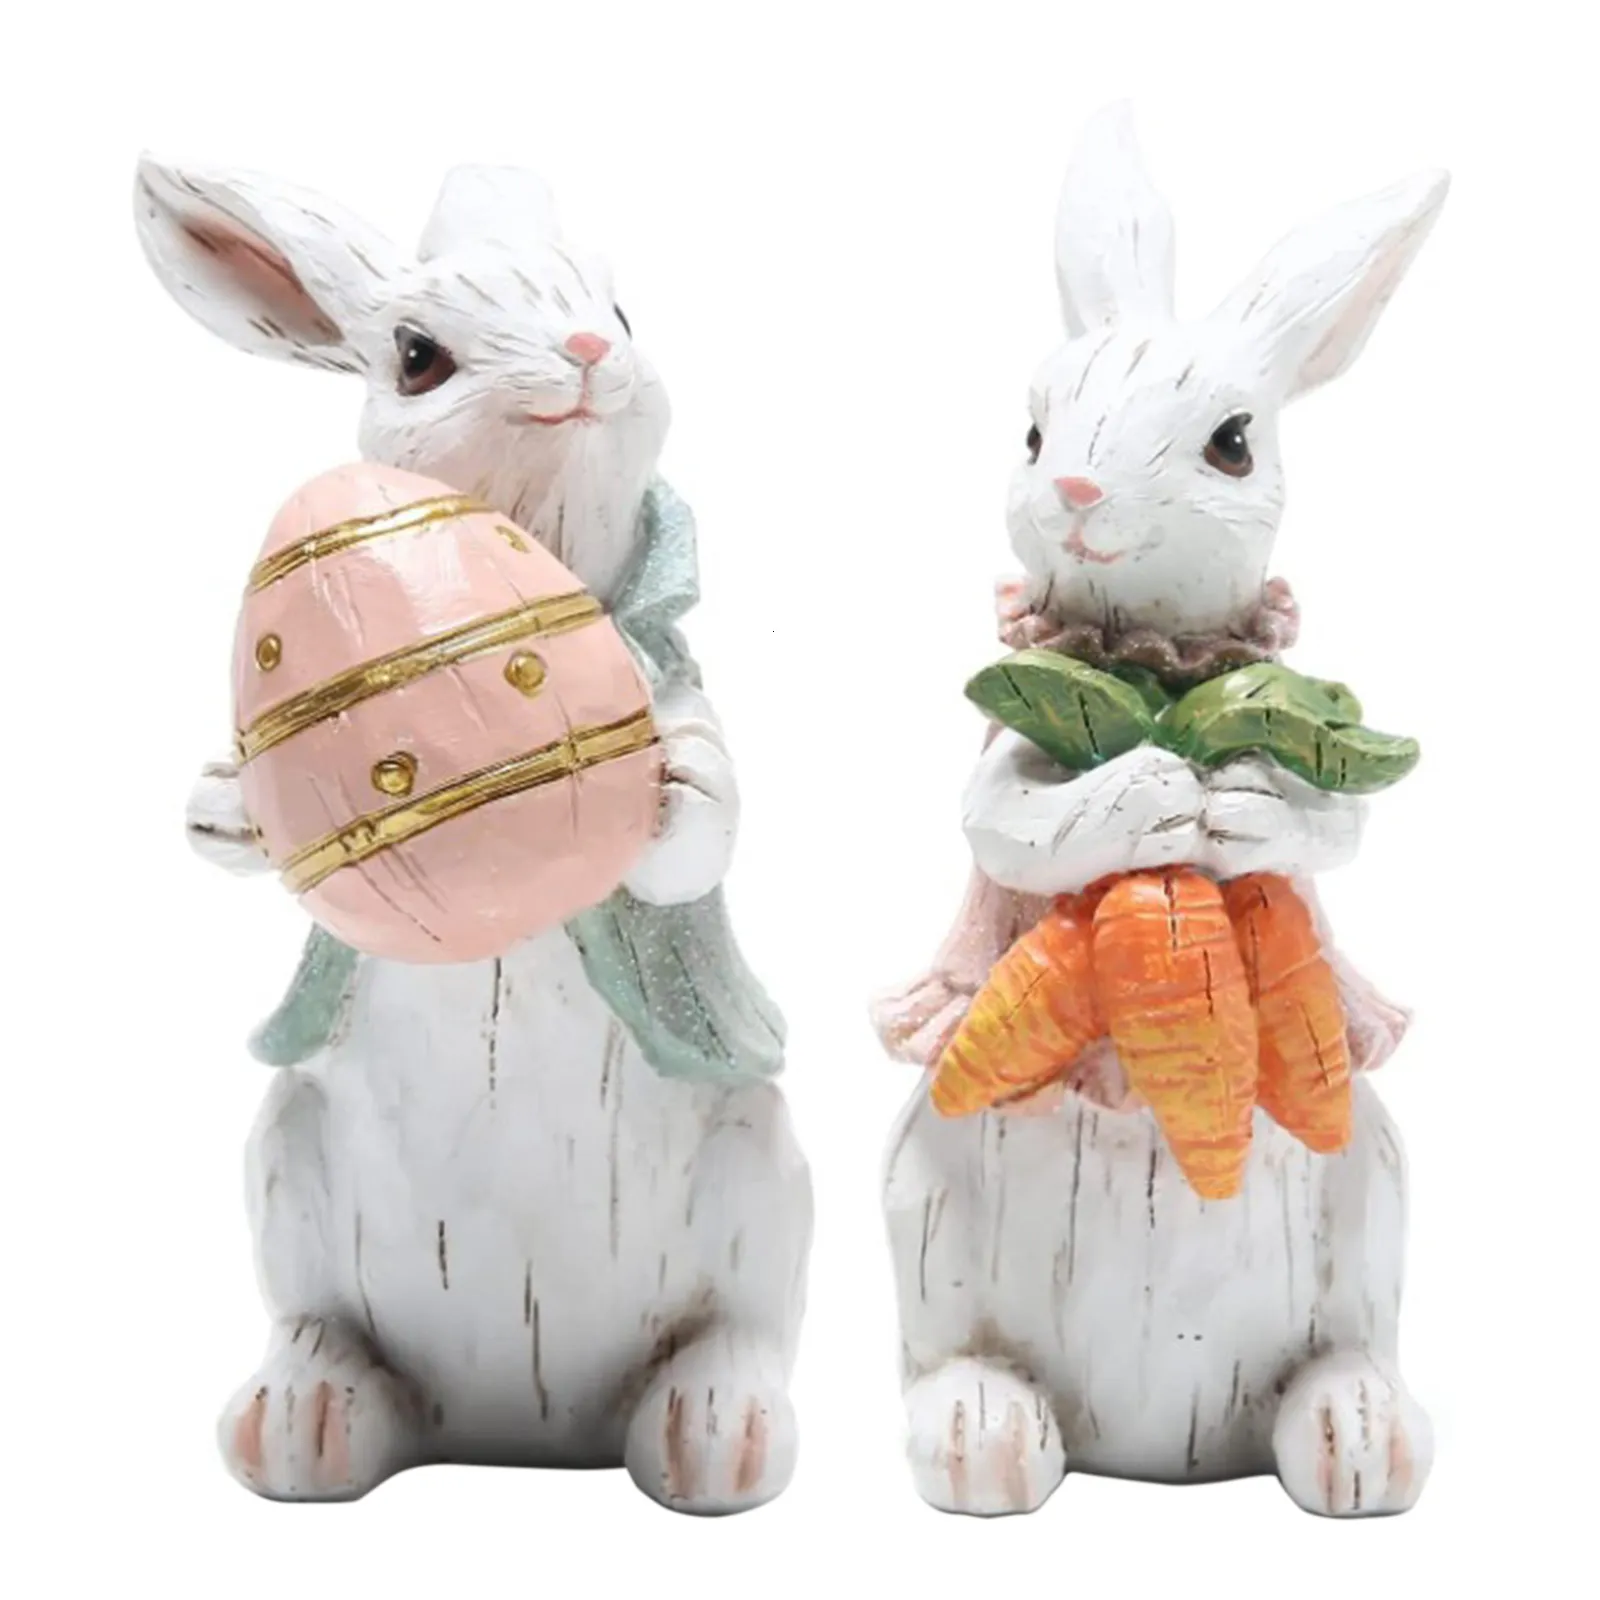 Other Event Party Supplies Resin Lovely Rabbit with carrot egg Table Oranmentsn Bunny Happy Easter Day Home Crafts Children's Room Decorative Gift 230311